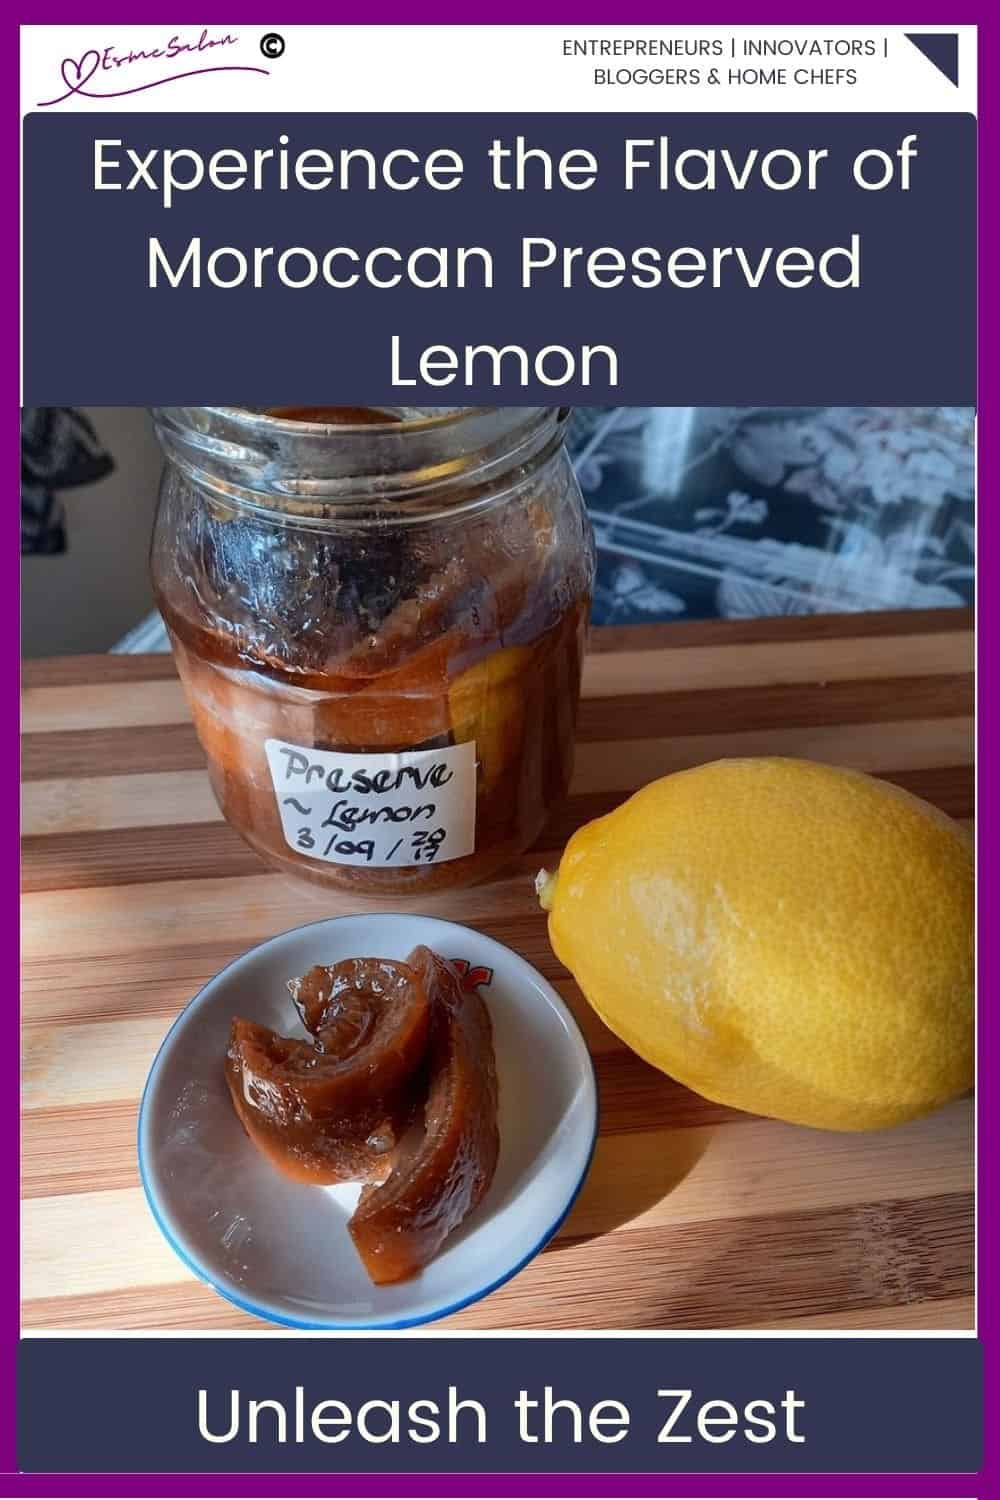 an image of Moroccan Preserved Lemon in a glass jar, as well as in a white bowl on the side